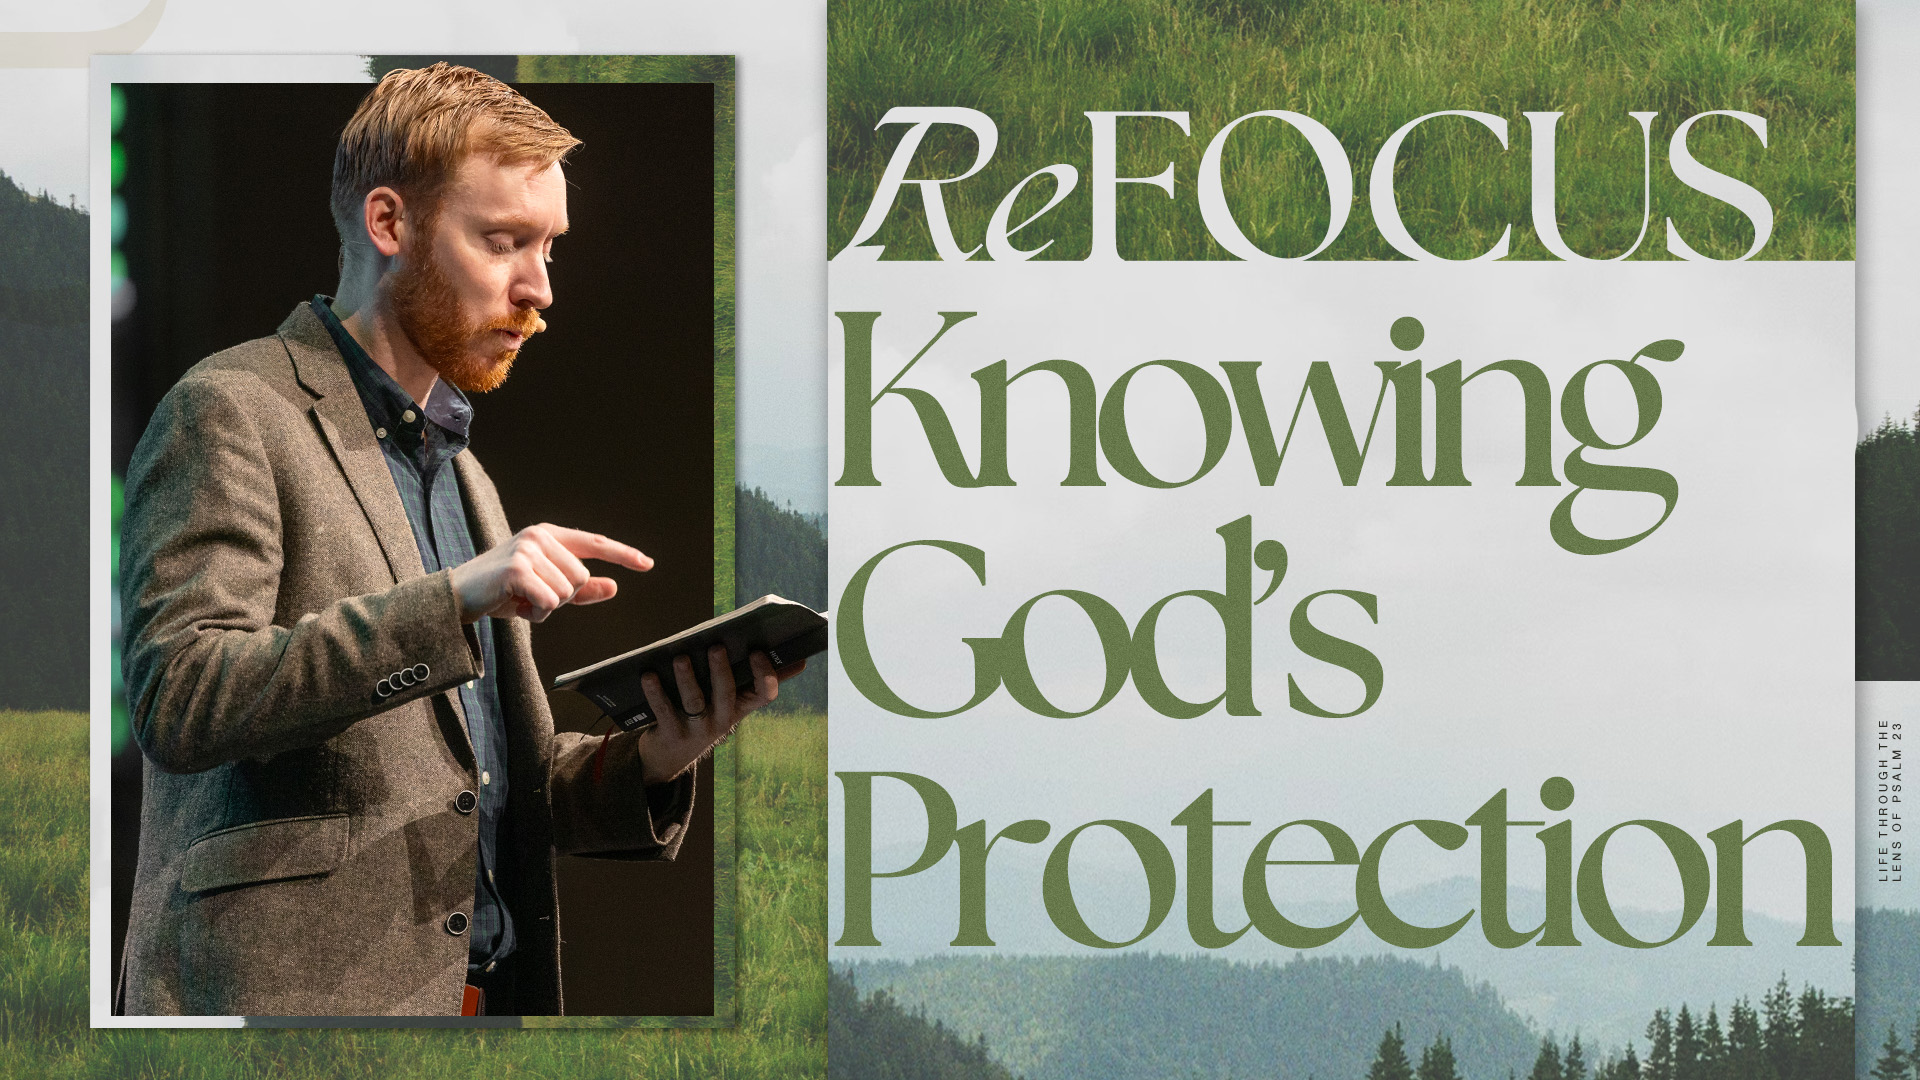 Knowing God's Protection